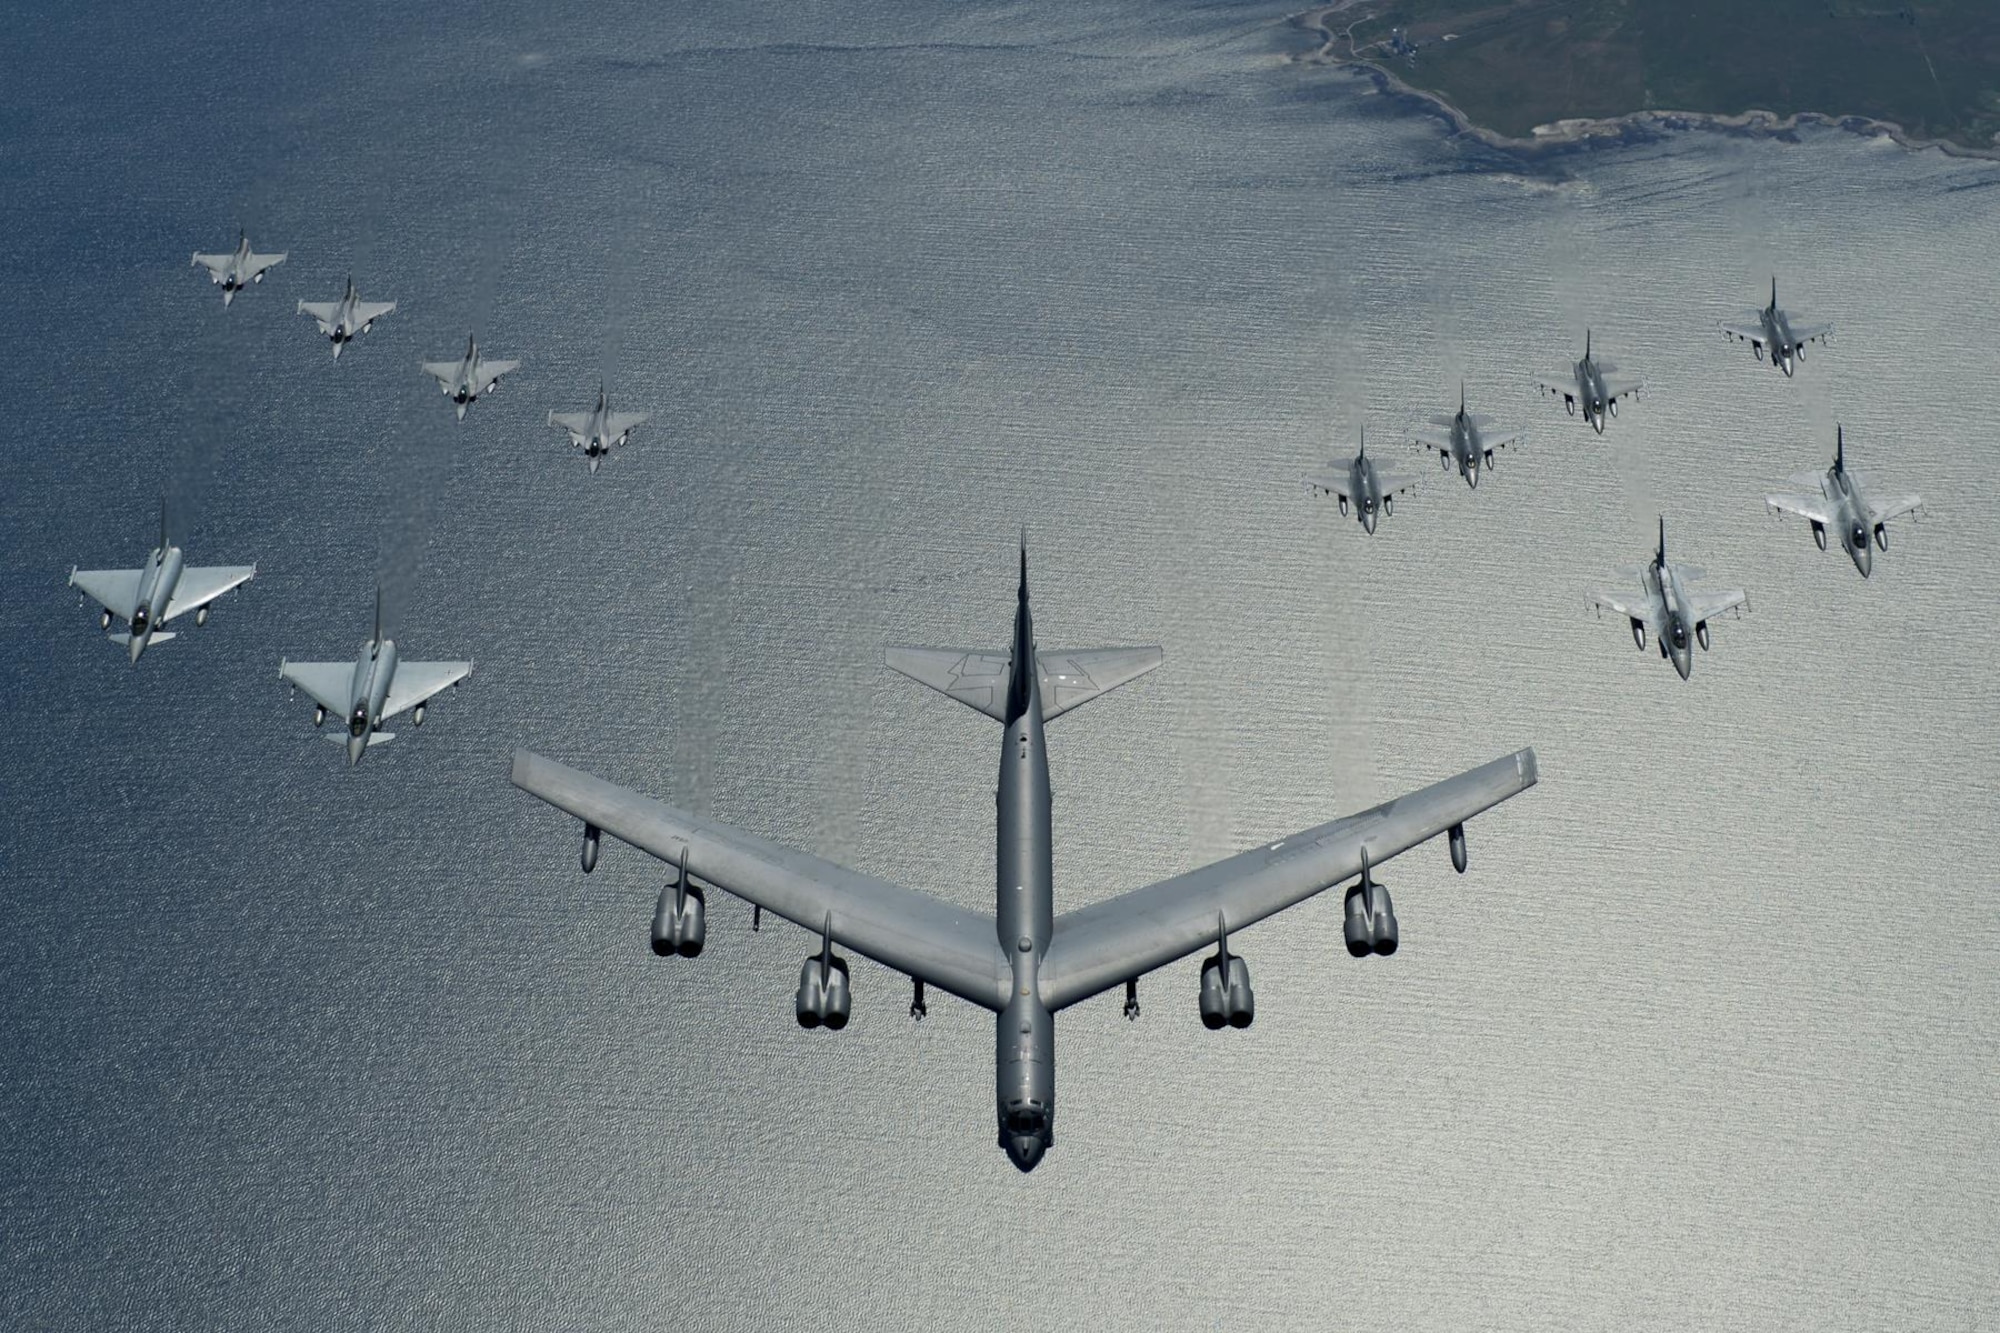 A U.S. Air Force B-52 Stratofortress leads a formation of aircraft including two Polish air force F-16 Fighting Falcons, four U.S. Air Force F-16 Fighting Falcons, two German Eurofighter Typhoons and four Swedish Gripens over the Baltic Sea, June 9, 2016. The formation was captured from a KC-135 from the 434th Air Refueling Wing, Grissom Air Force Base, Indiana as part of exercise BALTOPS 2016. (U.S. Air Force photo/Senior Airman Erin Babis)